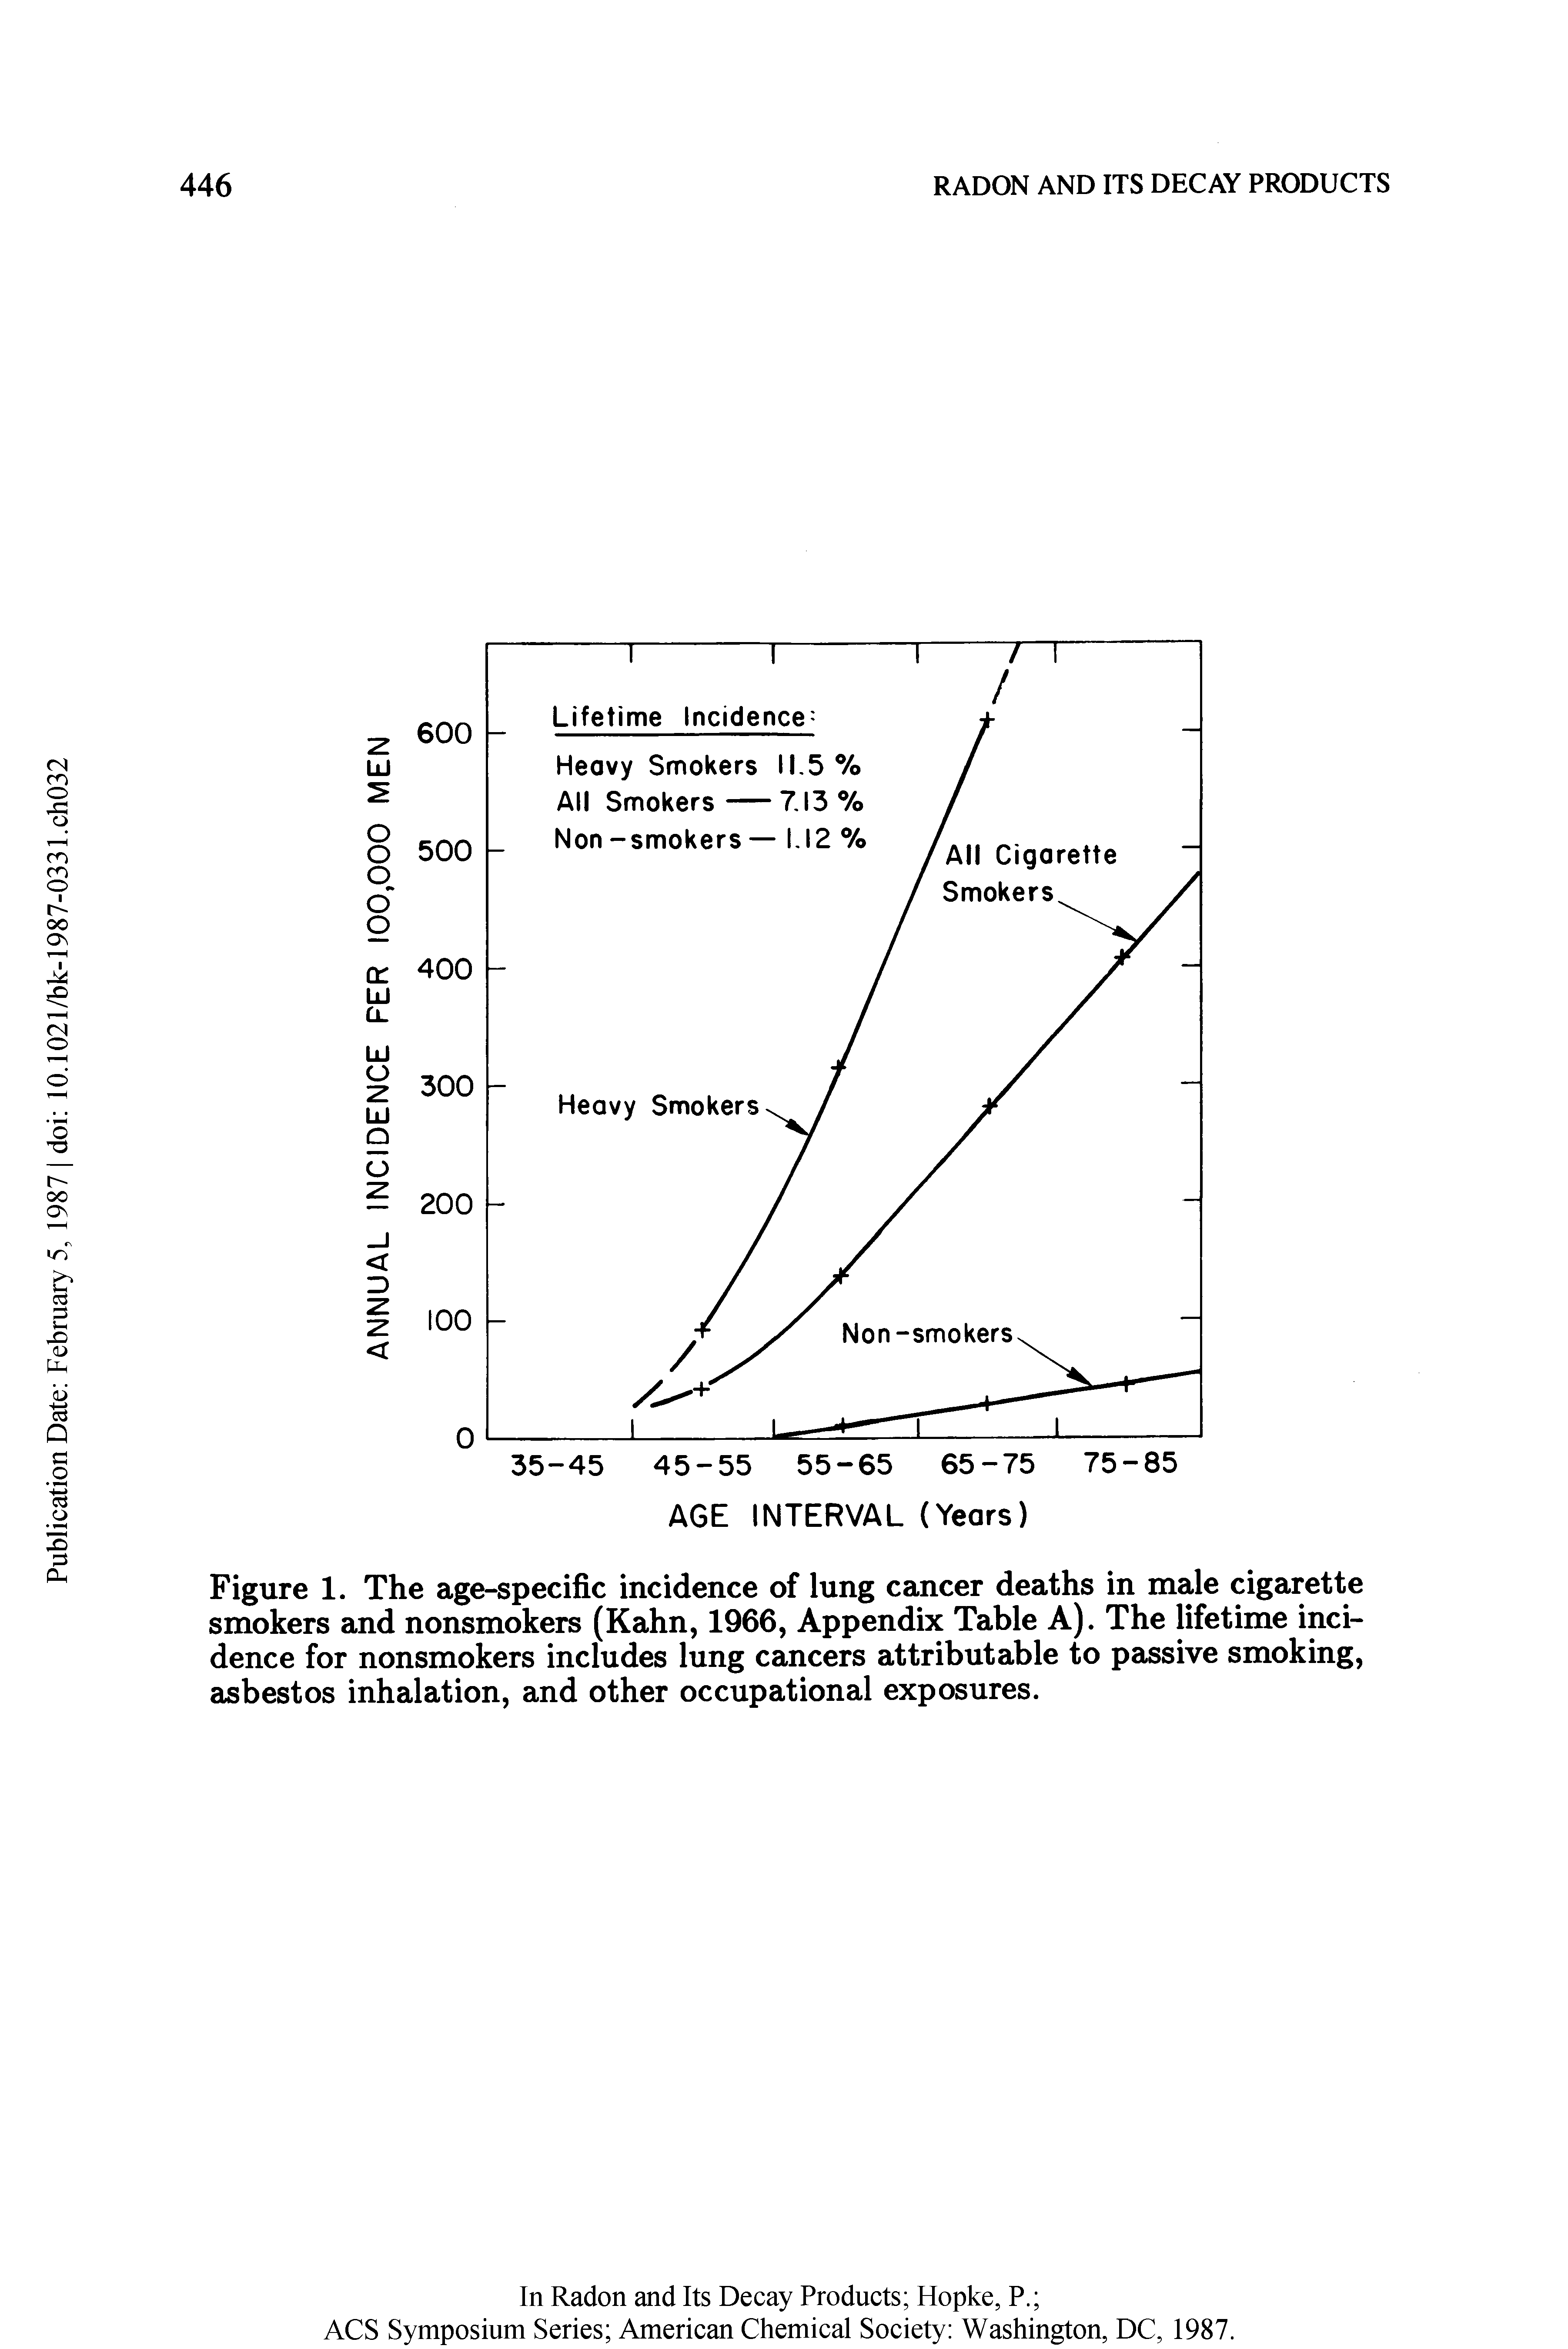 Figure 1. The age-specific incidence of lung cancer deaths in male cigarette smokers and nonsmokers (Kahn, 1966, Appendix Table A). The lifetime incidence for nonsmokers includes lung cancers attributable to passive smoking, asbestos inhalation, and other occupational exposures.